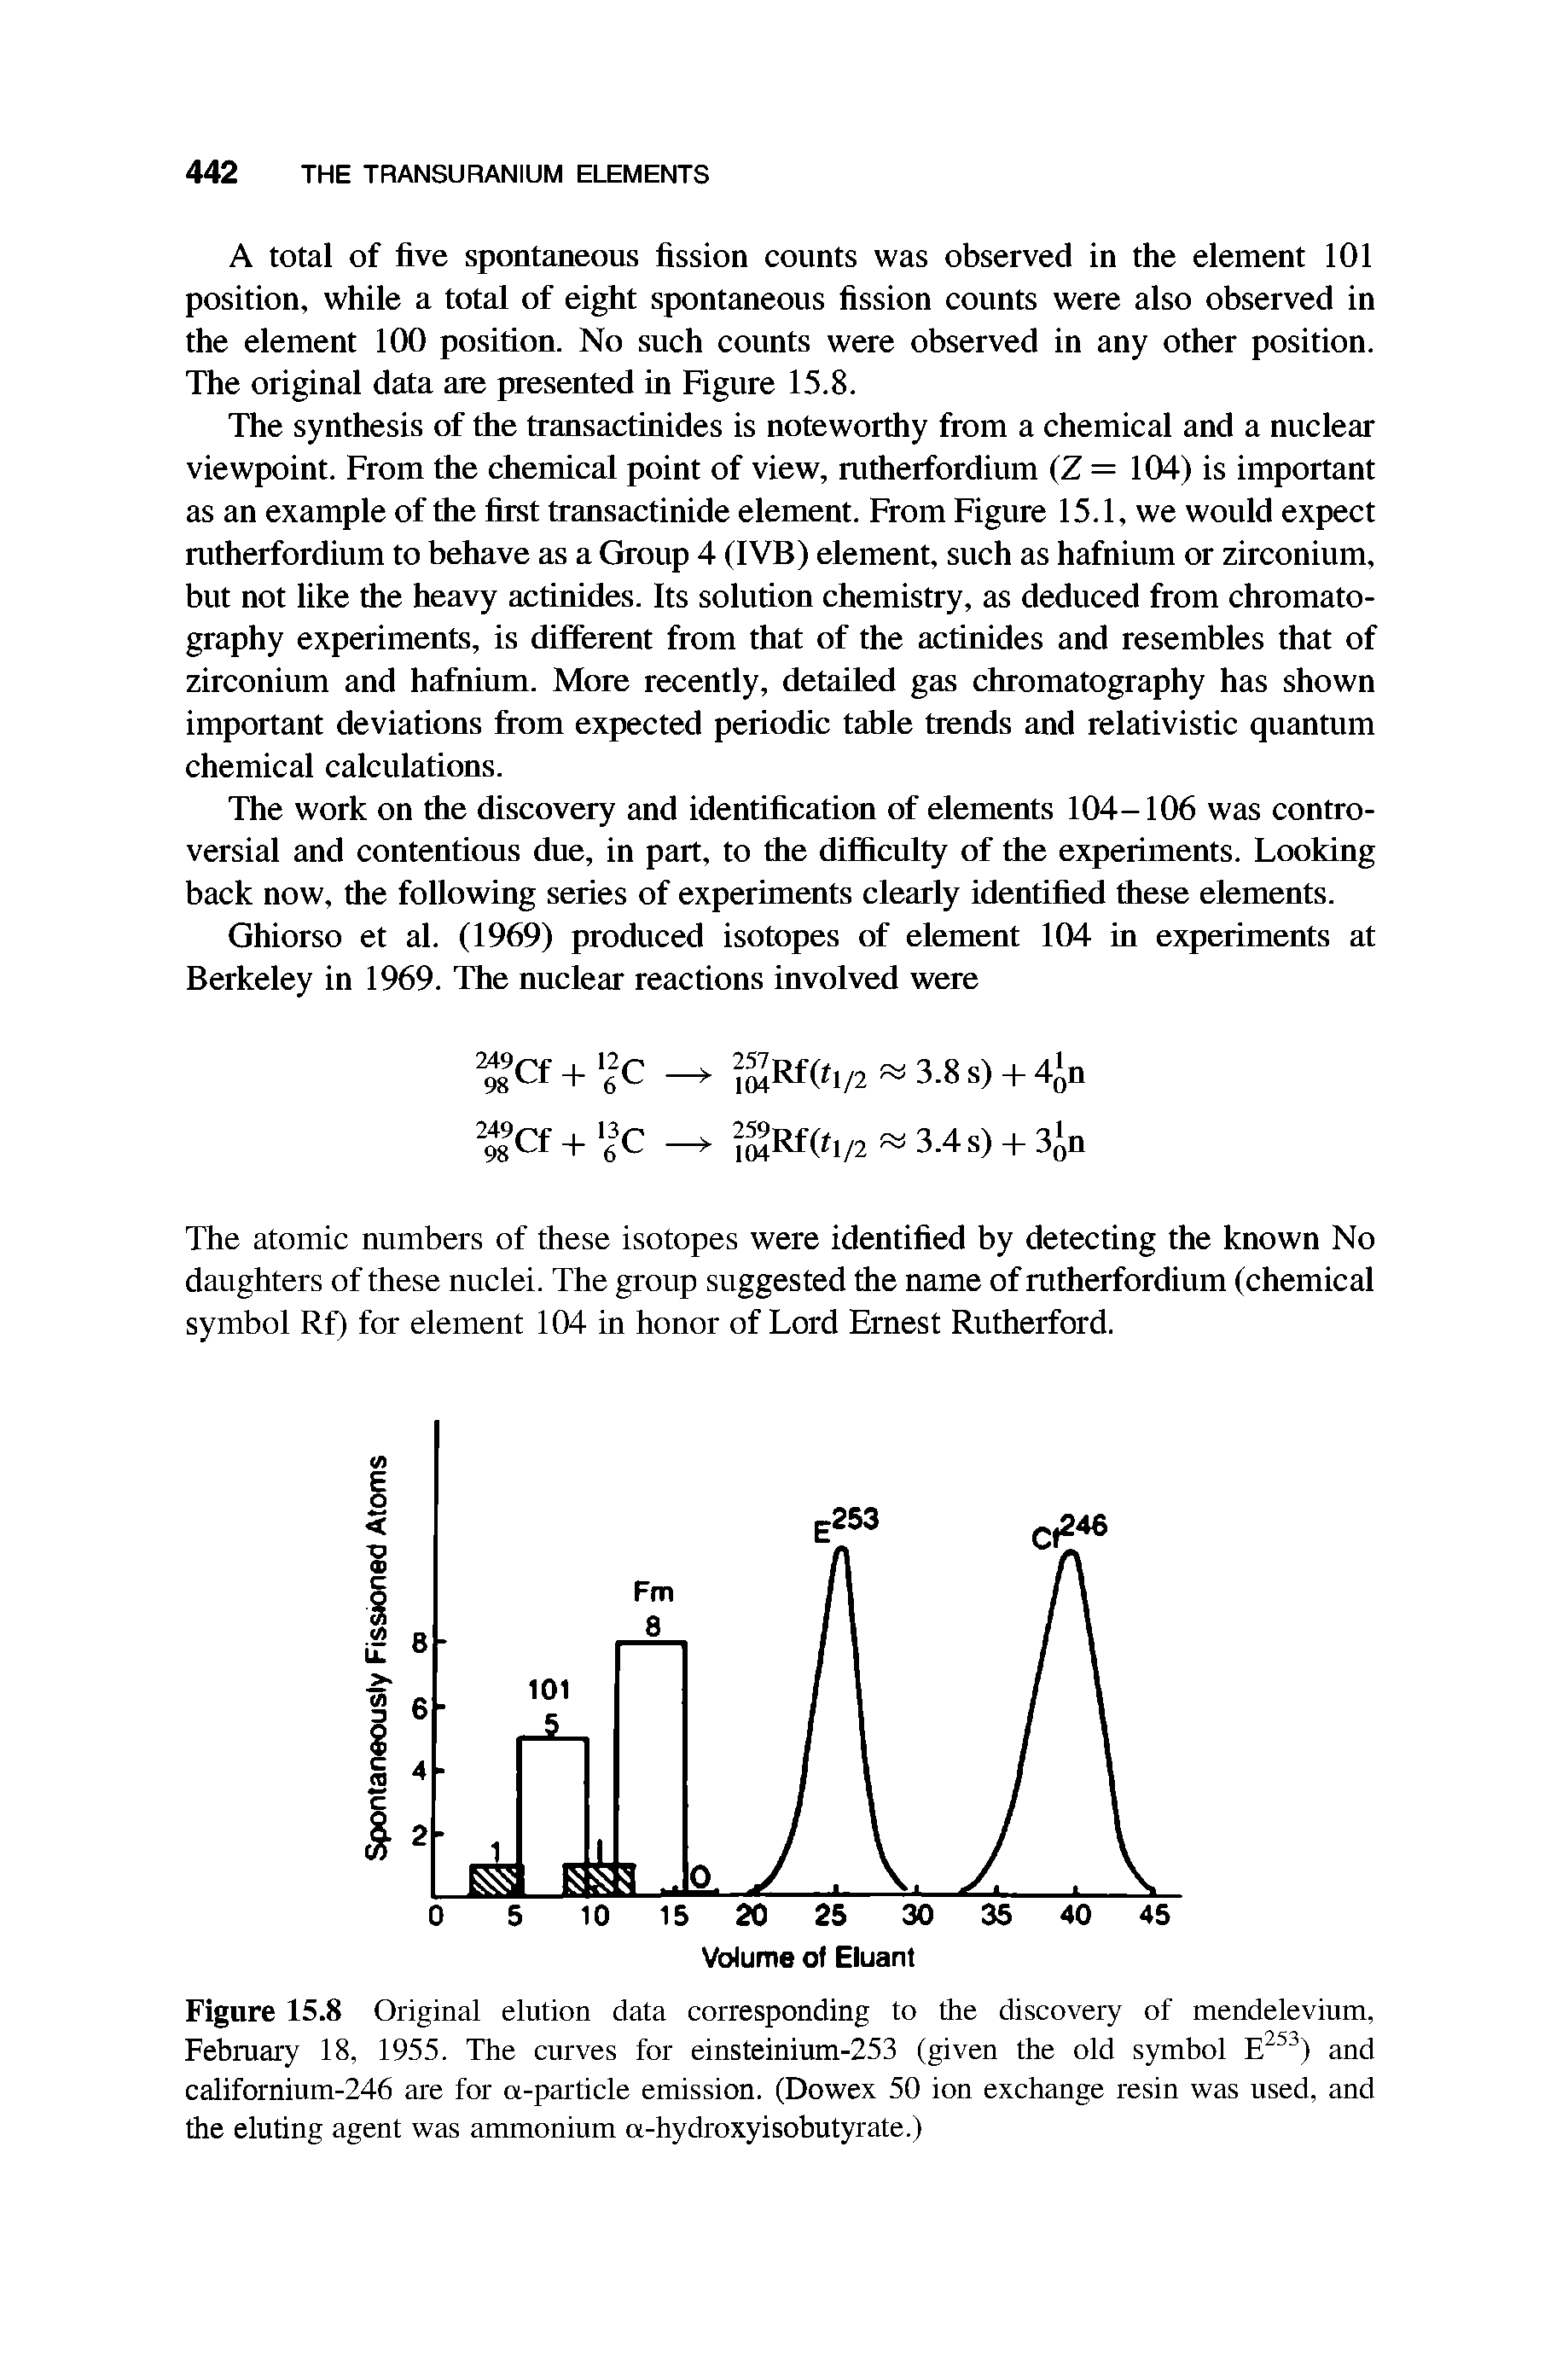 Figure 15.8 Original elution data corresponding to the discovery of mendelevium, February 18, 1955. The curves for einsteinium-253 (given the old symbol E253) and californium-246 are for a-particle emission. (Dowex 50 ion exchange resin was used, and the eluting agent was ammonium a-hydroxyisobutyrate.)...